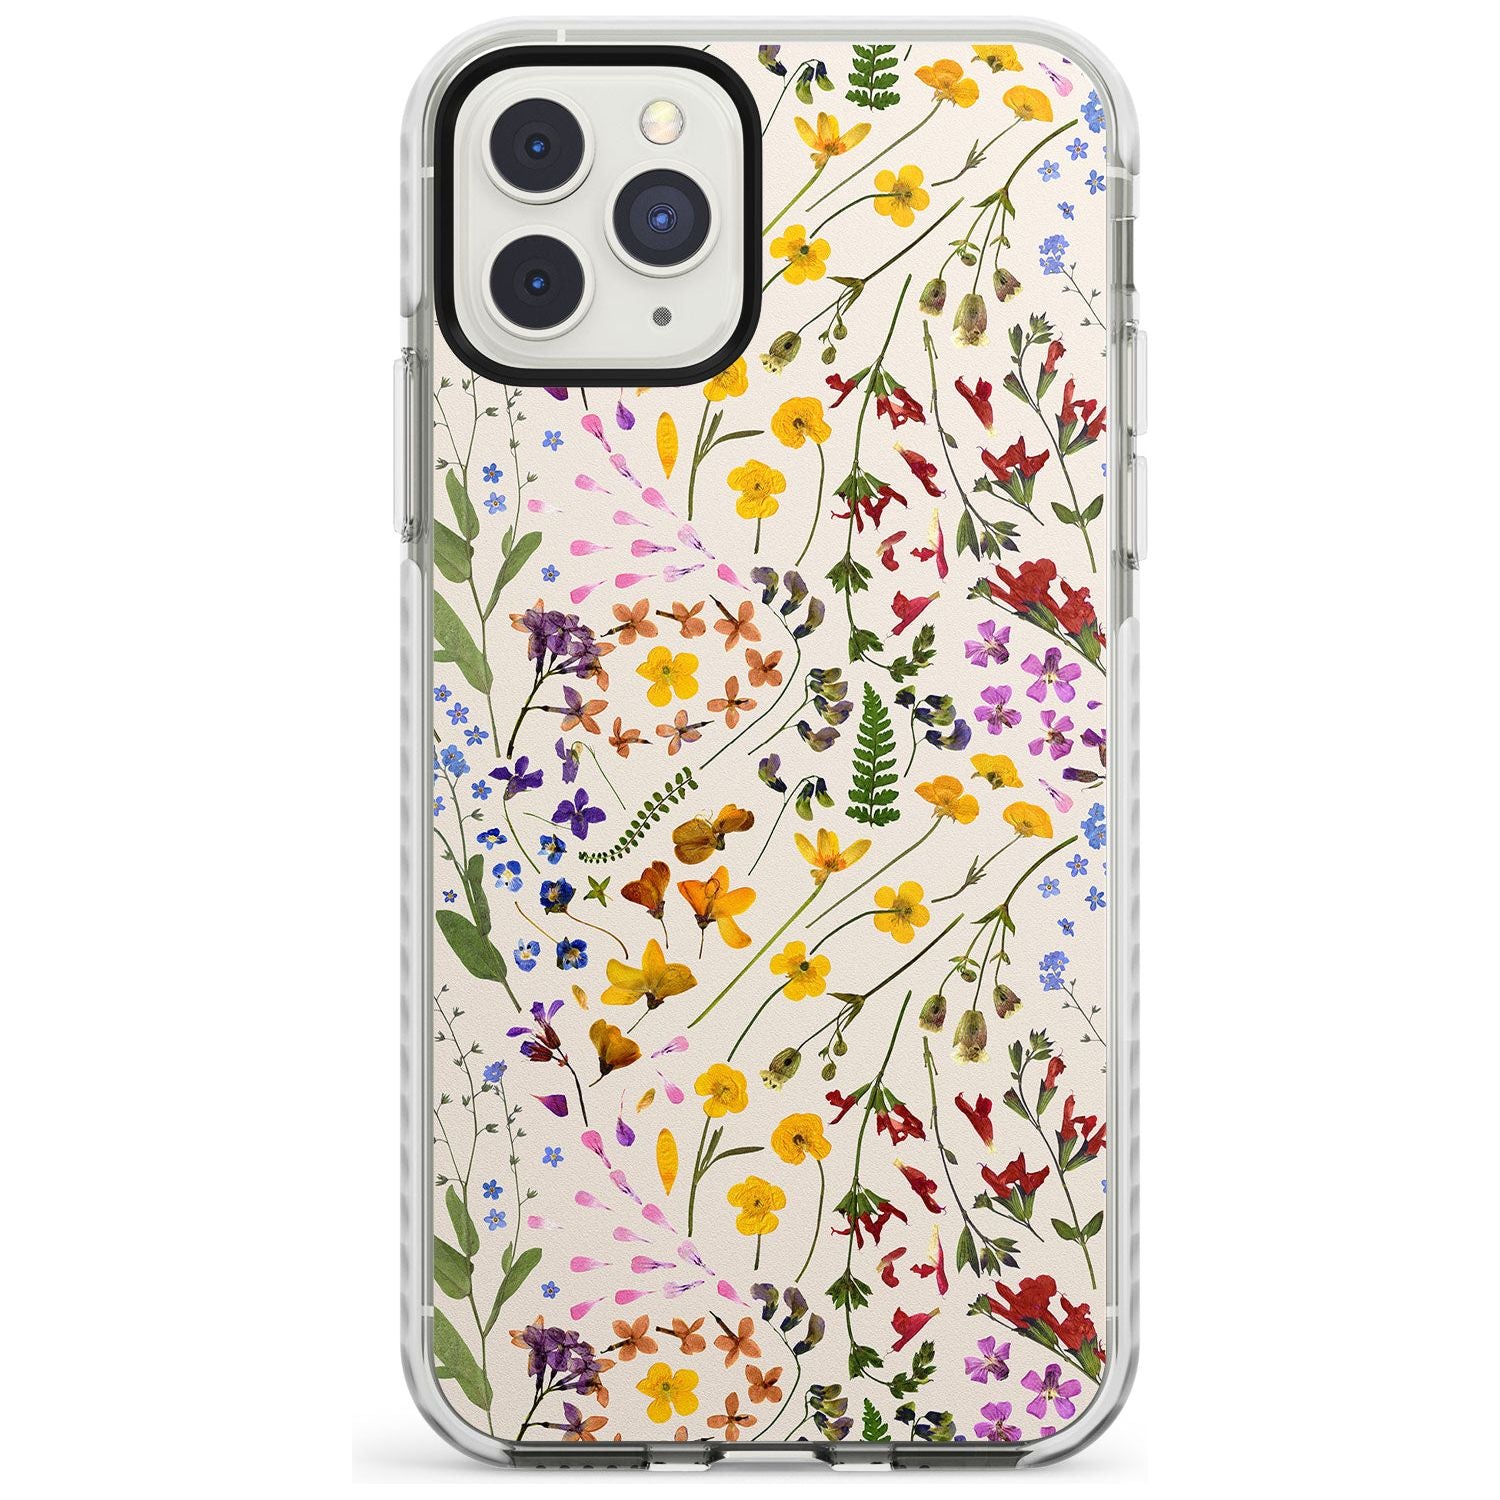 Wildflower & Leaves Cluster Design - Cream Impact Phone Case for iPhone 11 Pro Max